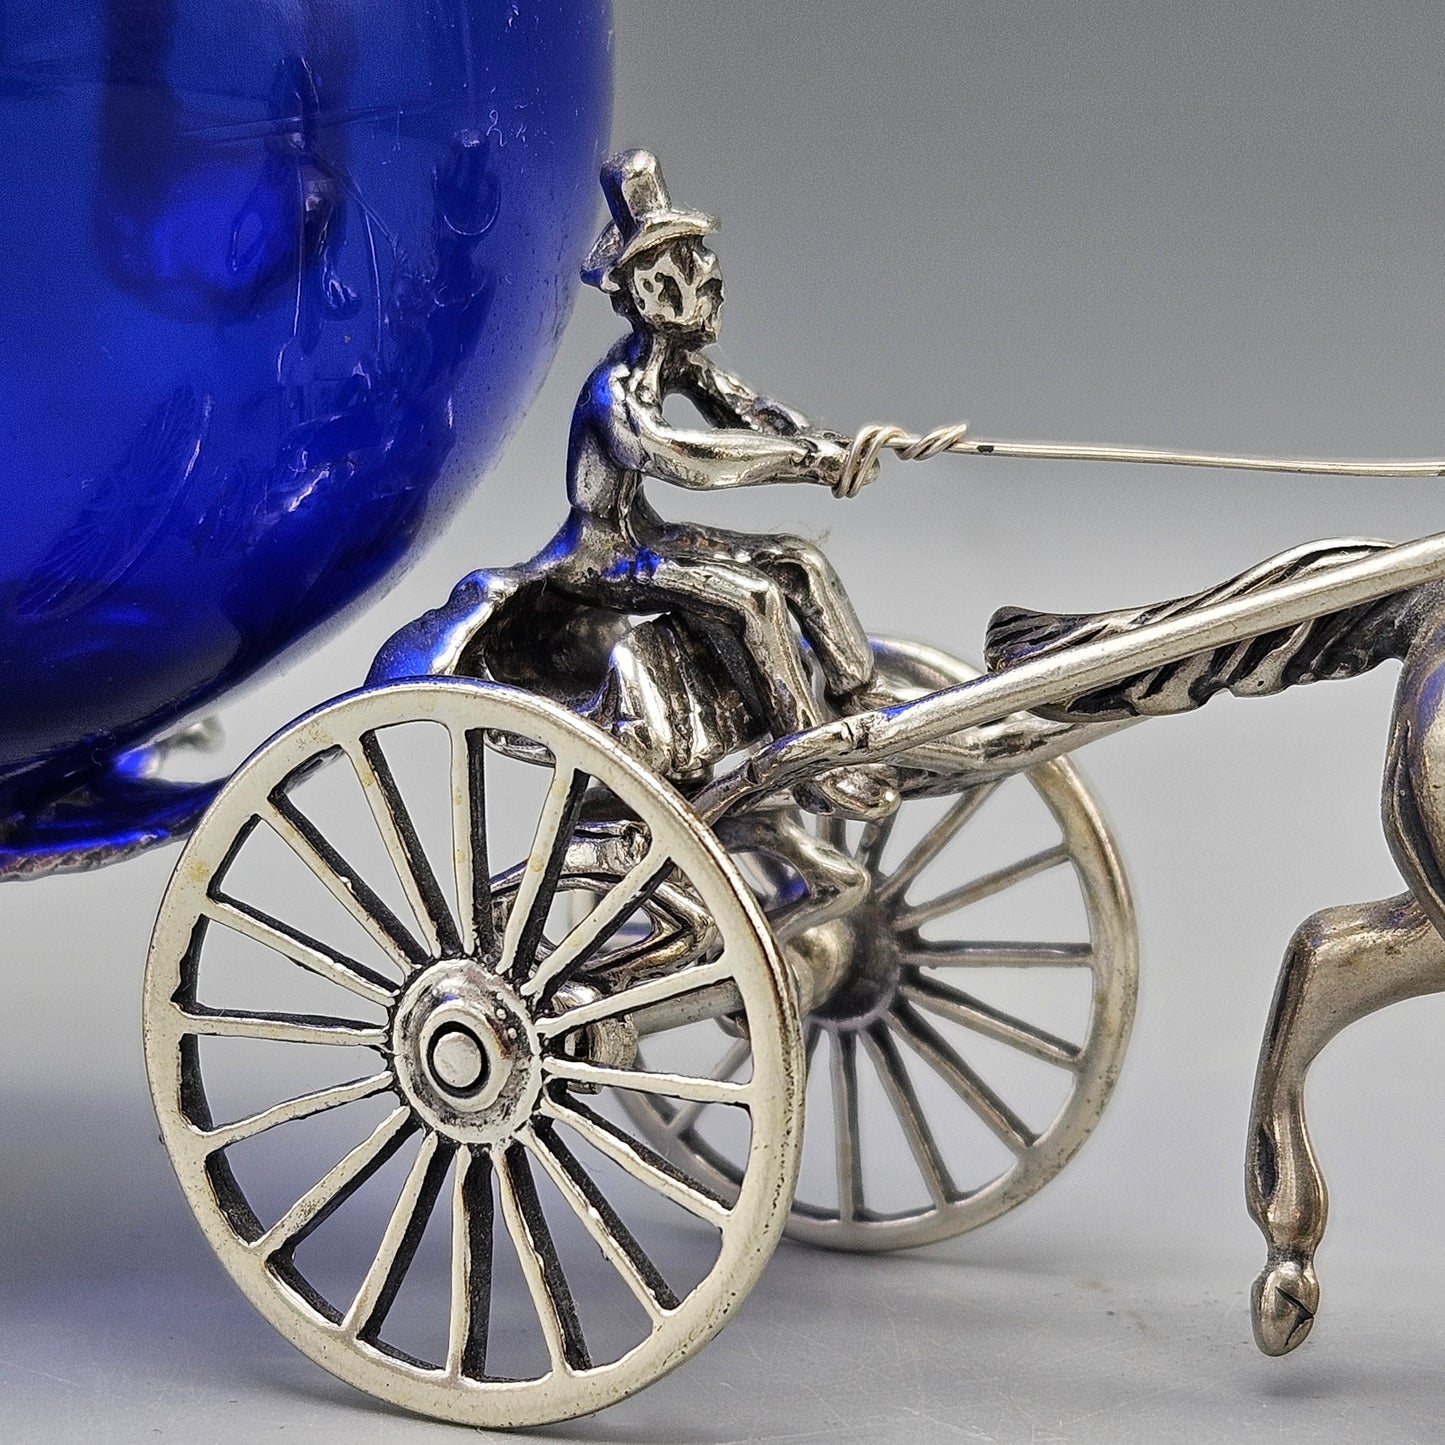 Vintage Sterling Silver Horse Drawn Blue Glass Carriage